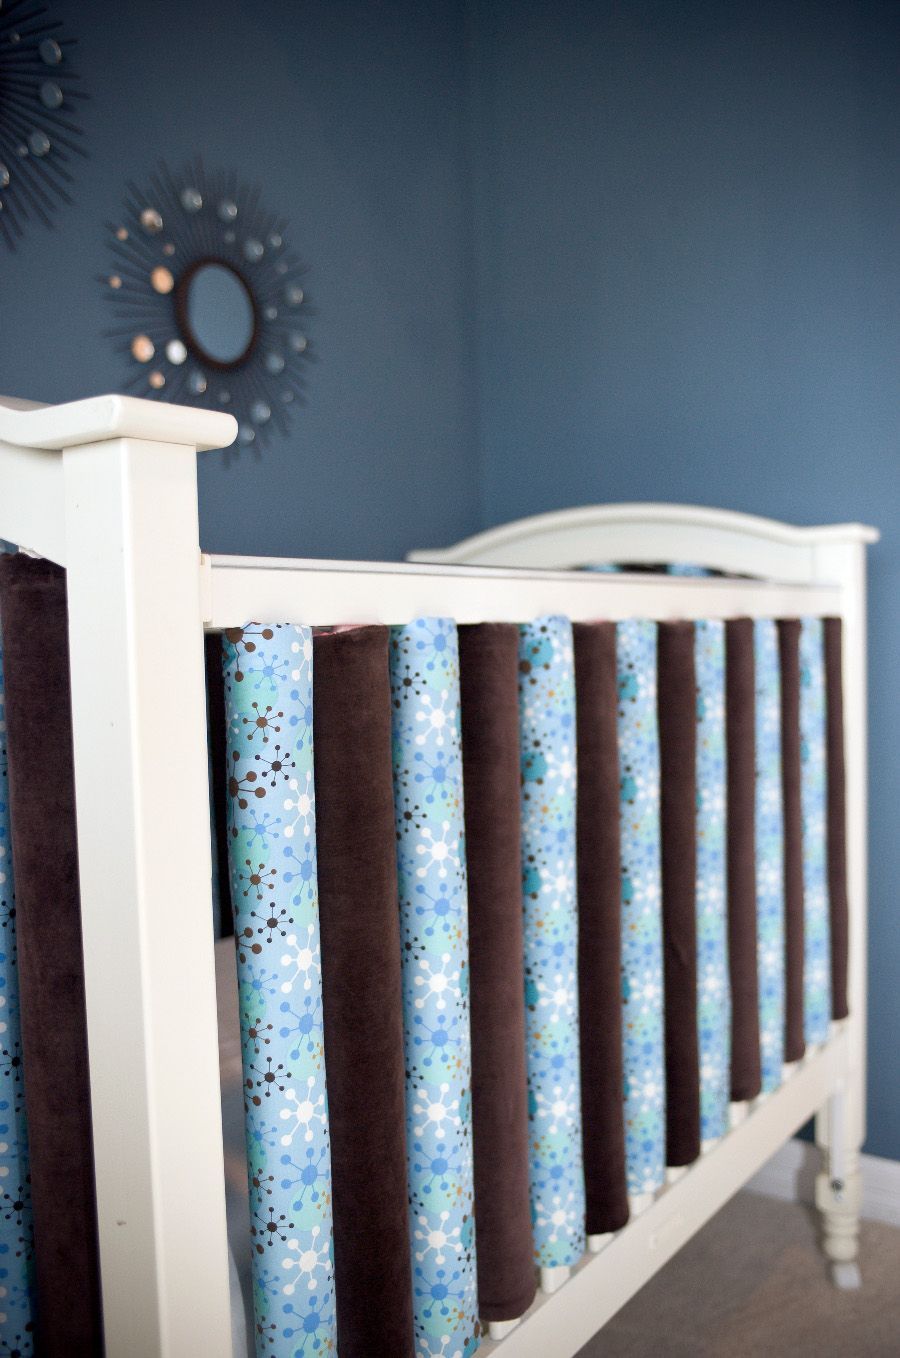 crib bumpers go vertical #baby #nursery #crib #bumpers–Love this bc I am a new